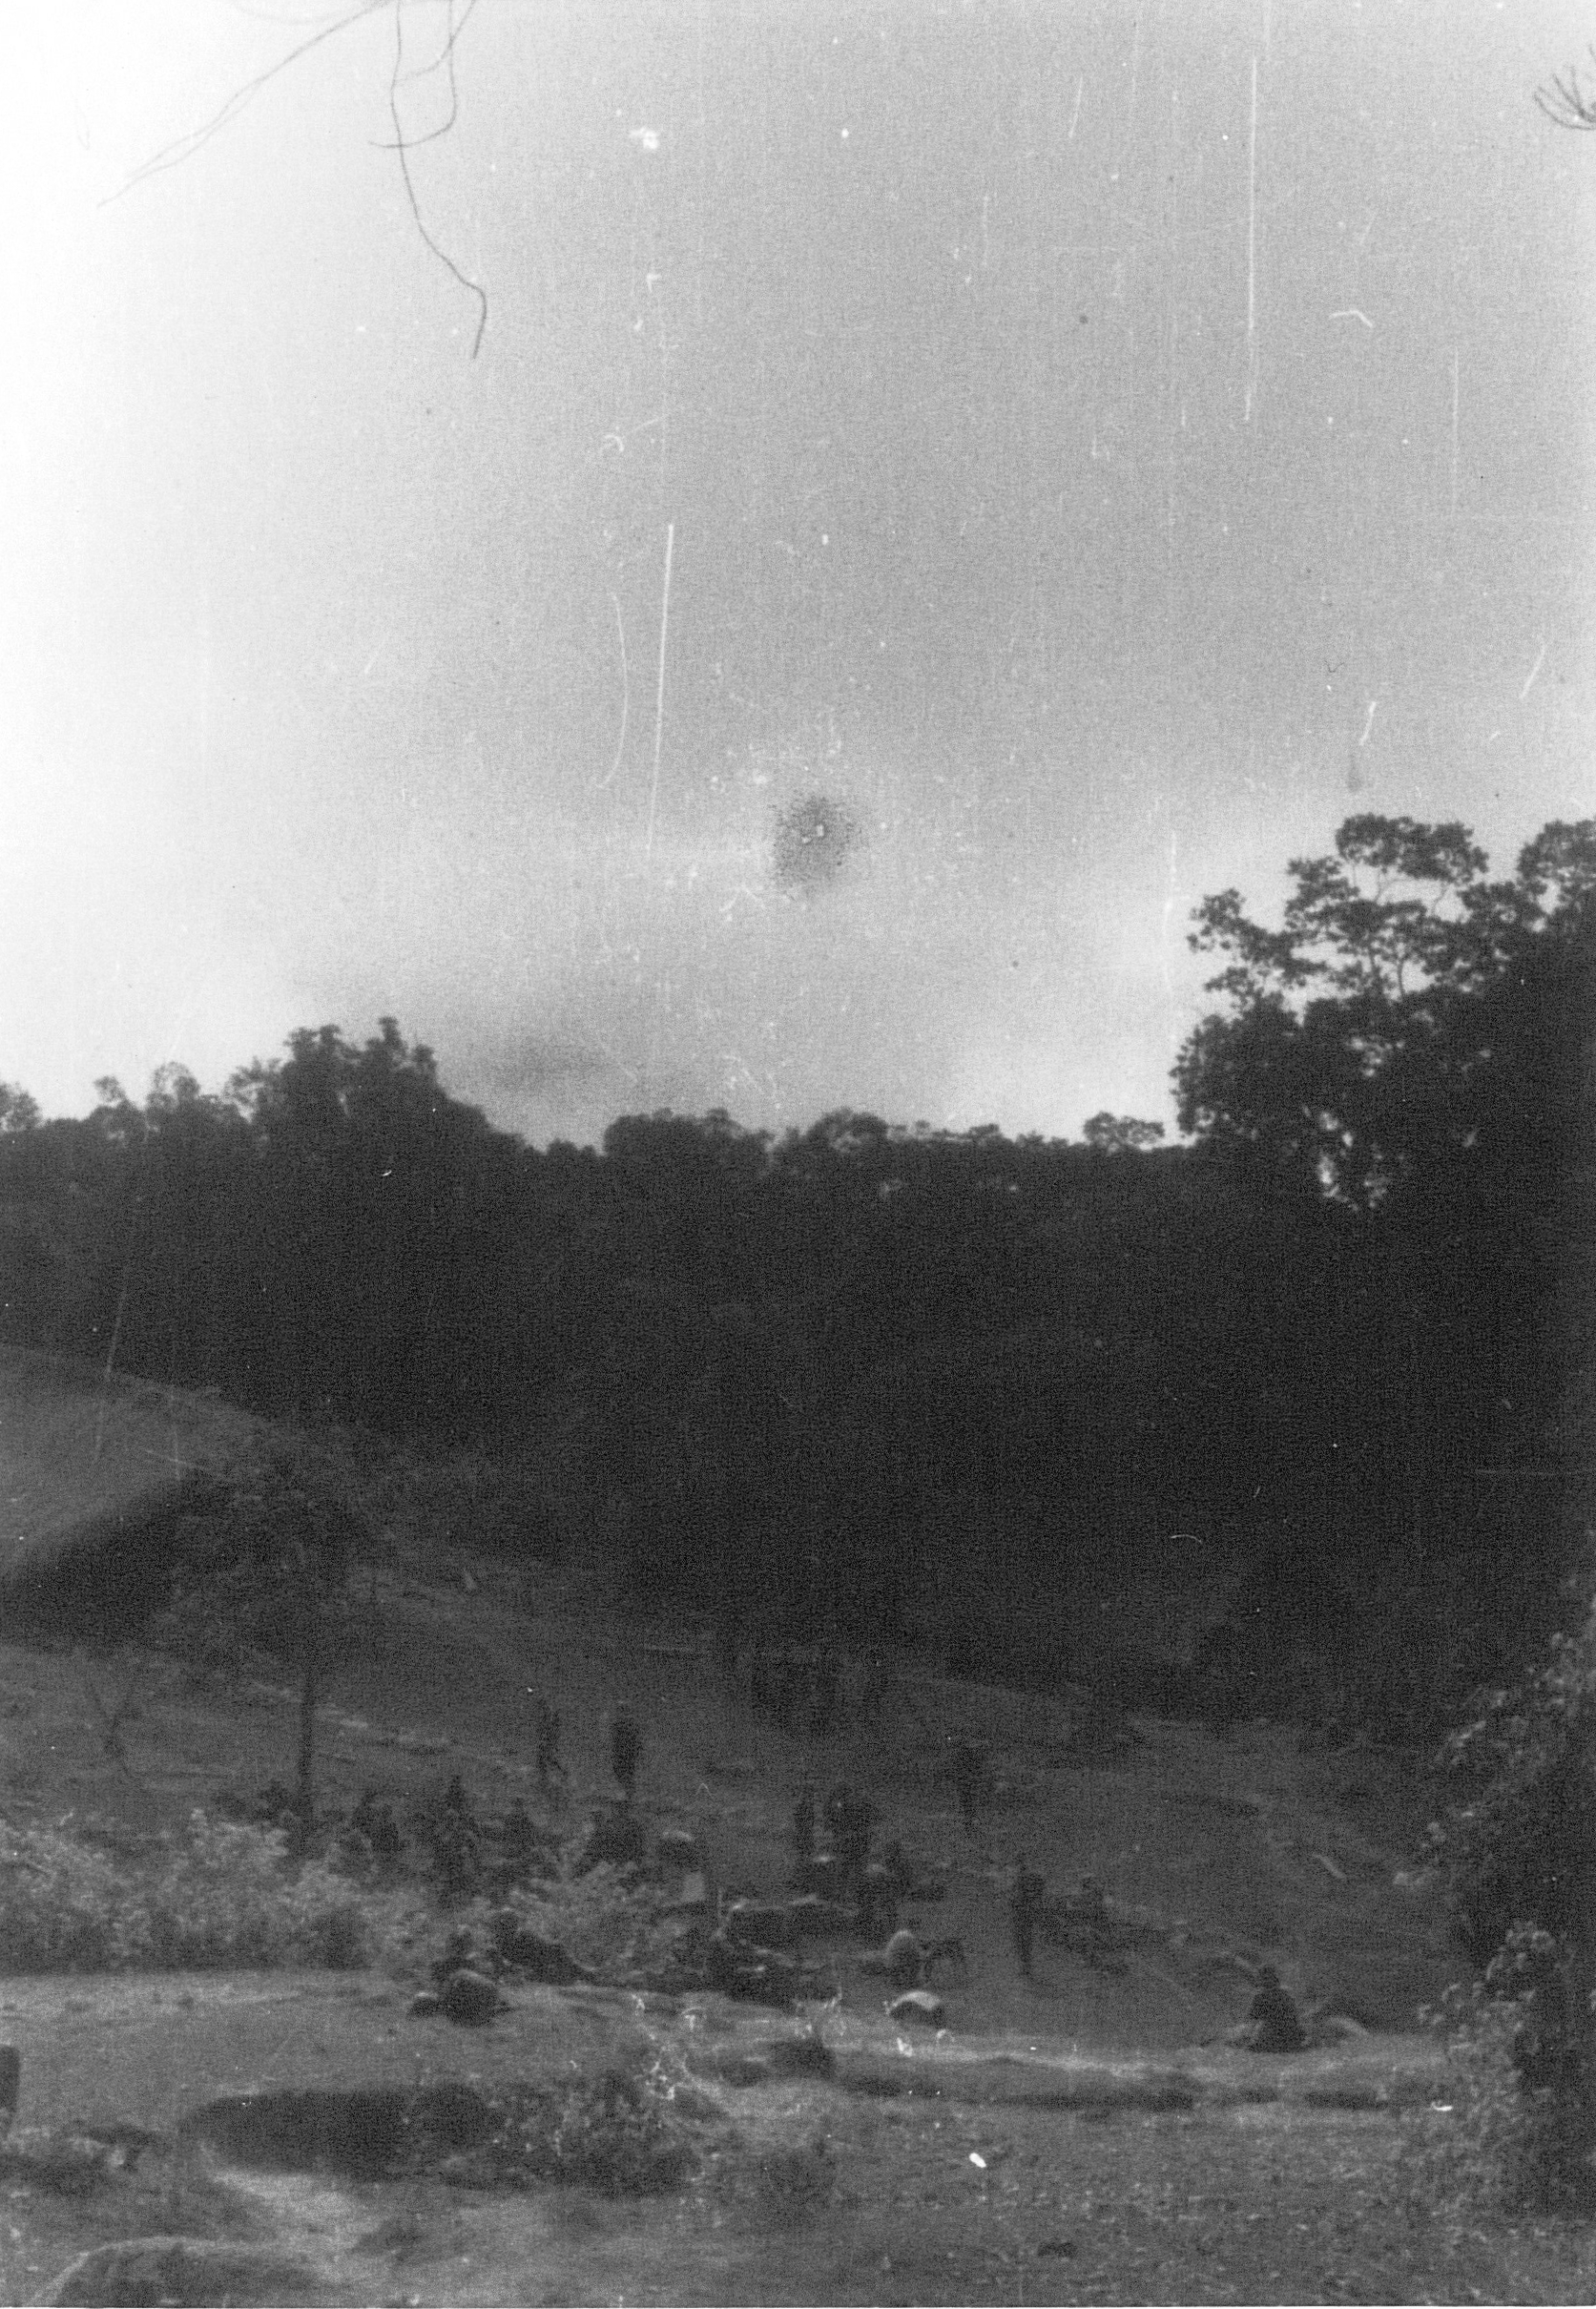 Village at Franglui, northern Burma, 3 Jan 1945; photo taken by personnel of US 5332nd Brigade (Provisional)